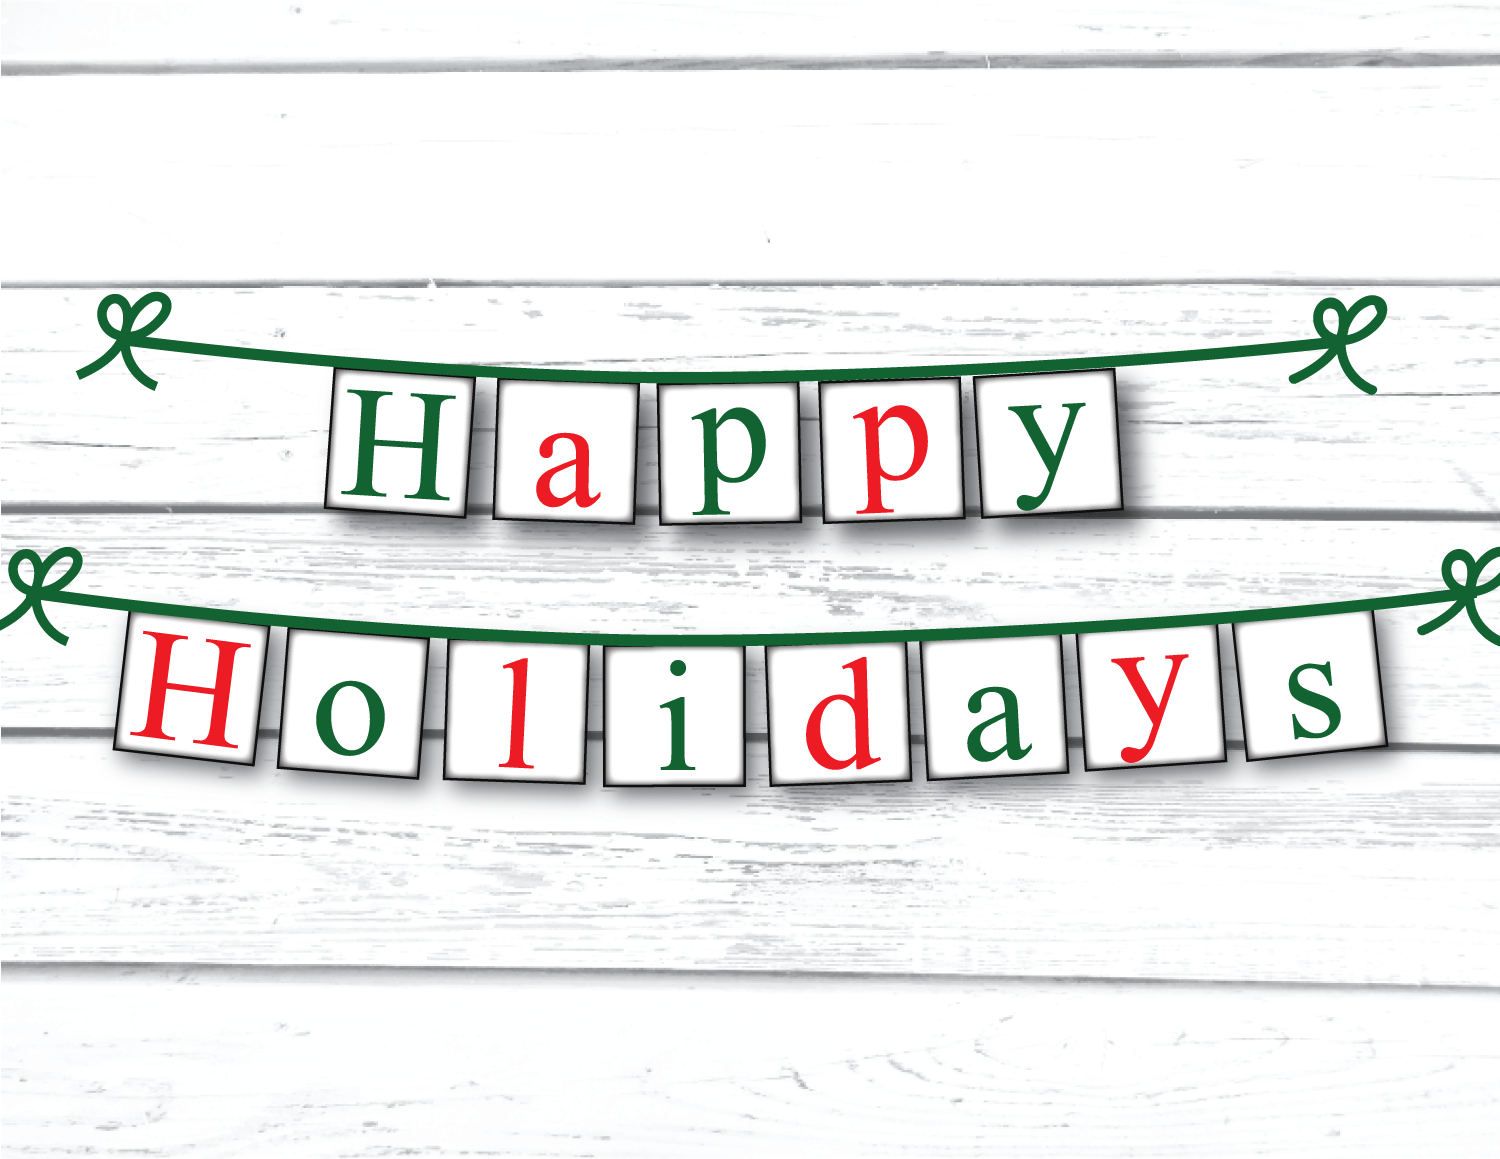 happy holidays banner with red and green letters - festive holiday decor - Celebrating Together